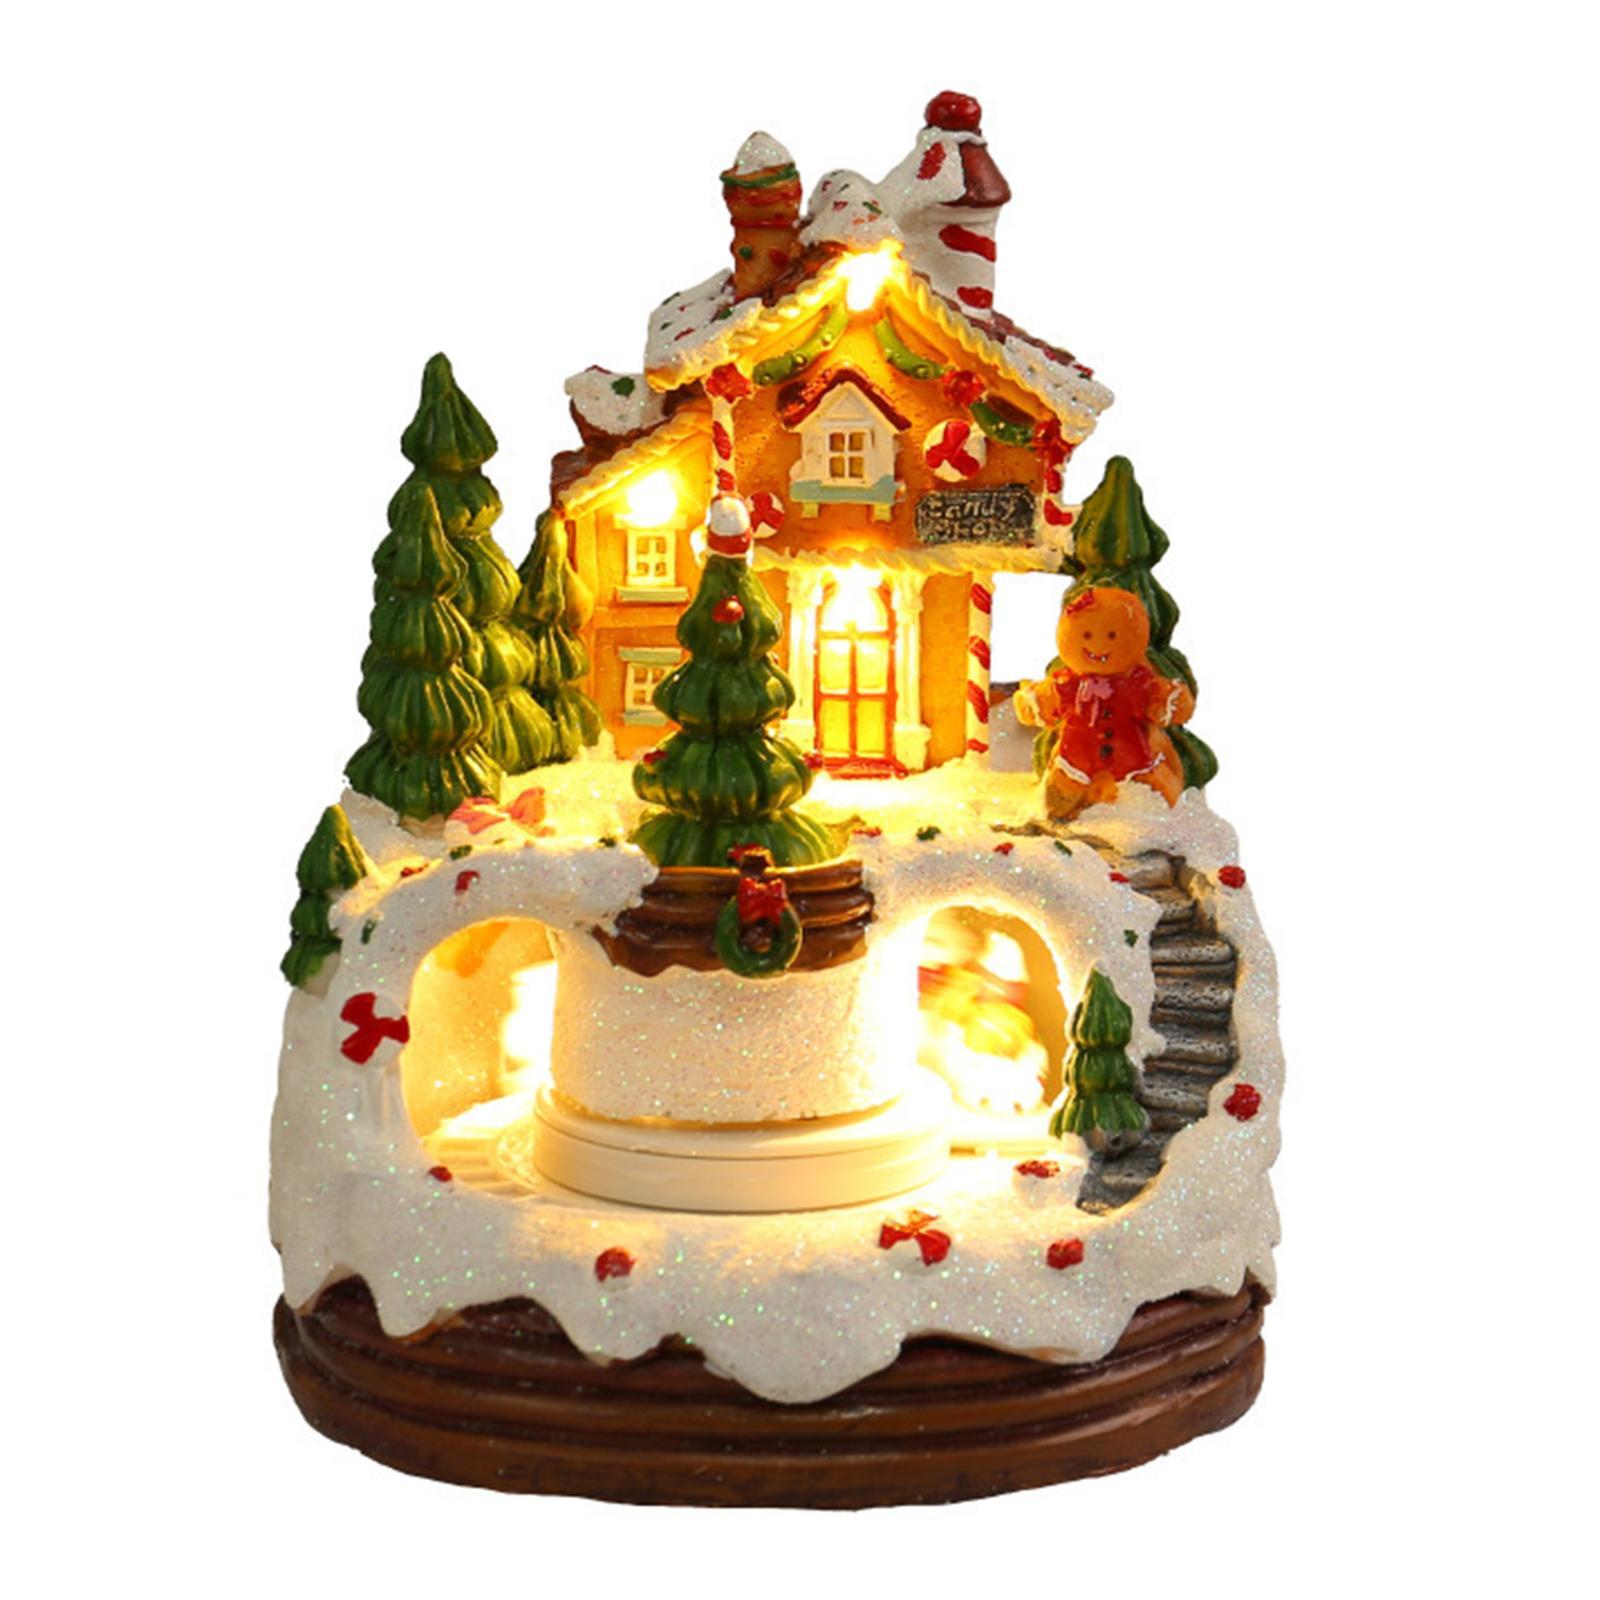 Music Box Christmas Ornaments Ornaments Gifts Building Figurines Christmas Scene for Coffee Table Indoor Housewarming Holiday